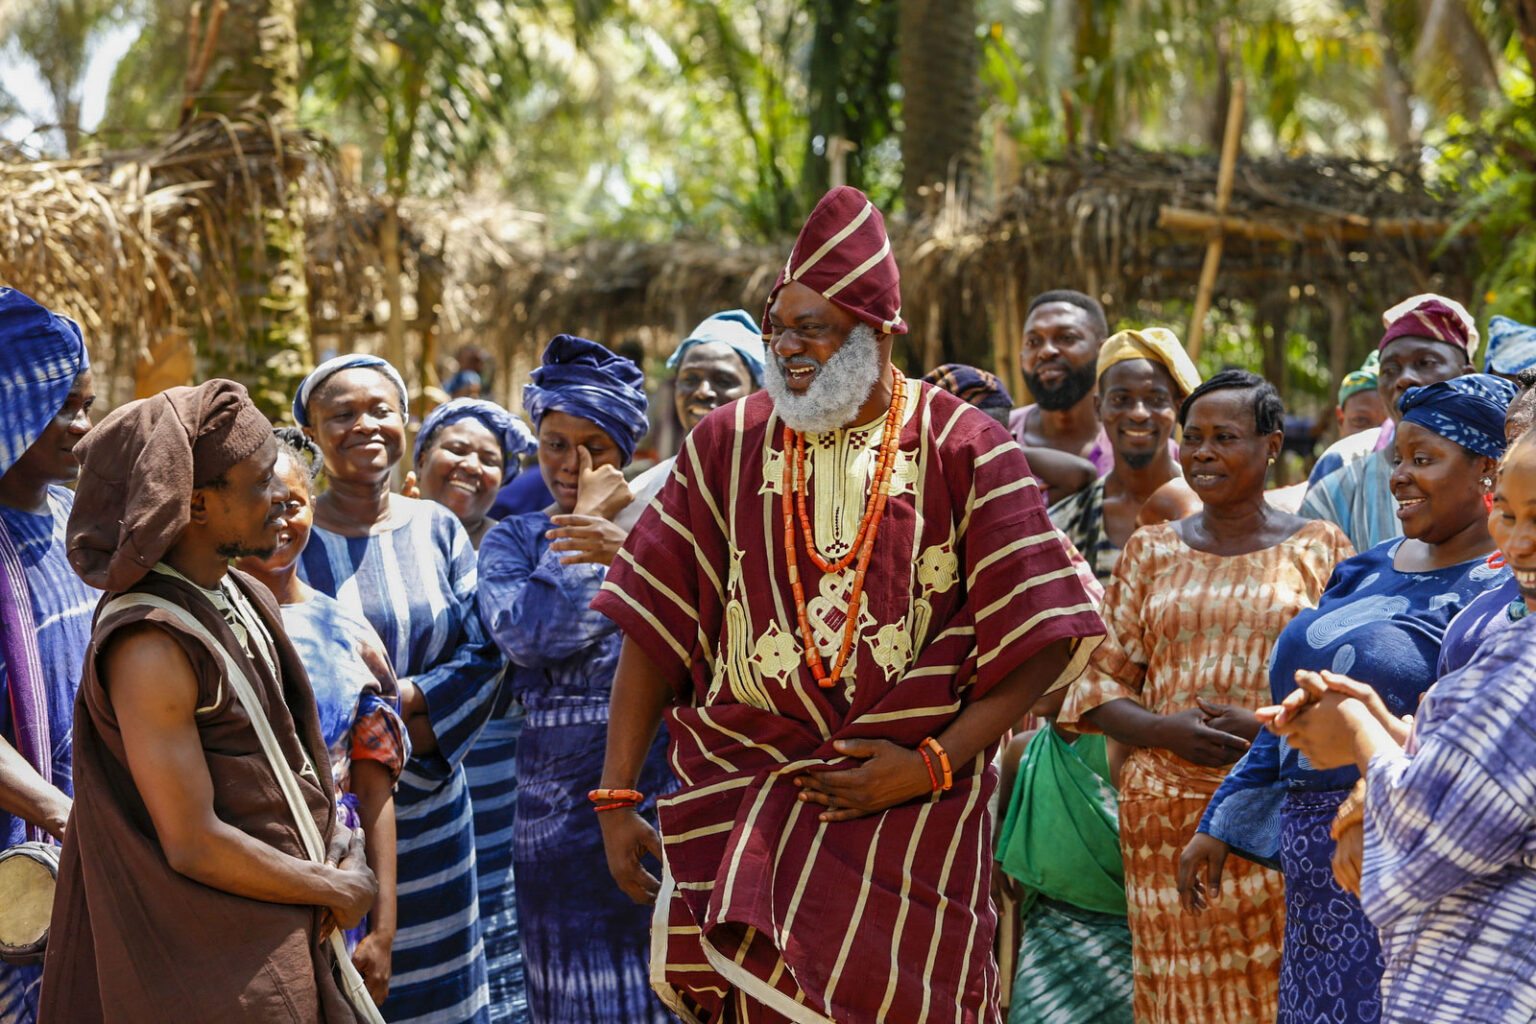 A still from the film, Elesin Oba, the King's Horseman. [Image Credit: Premium Times]